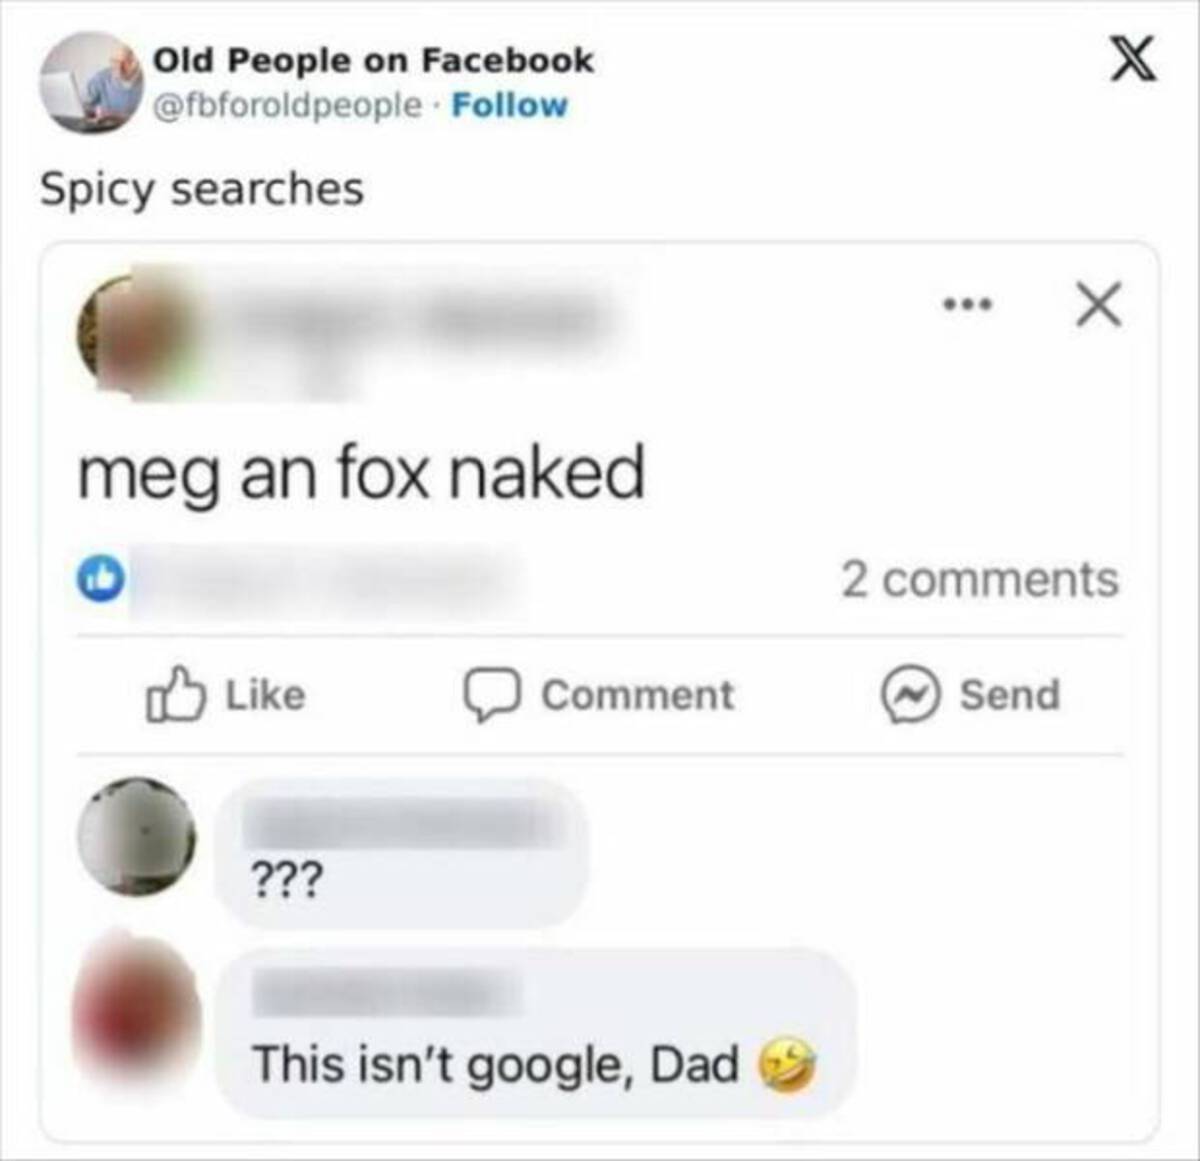 funny people on facebook - Old People on Facebook Spicy searches megan fox naked Comment ??? This isn't google, Dad 2 Send X